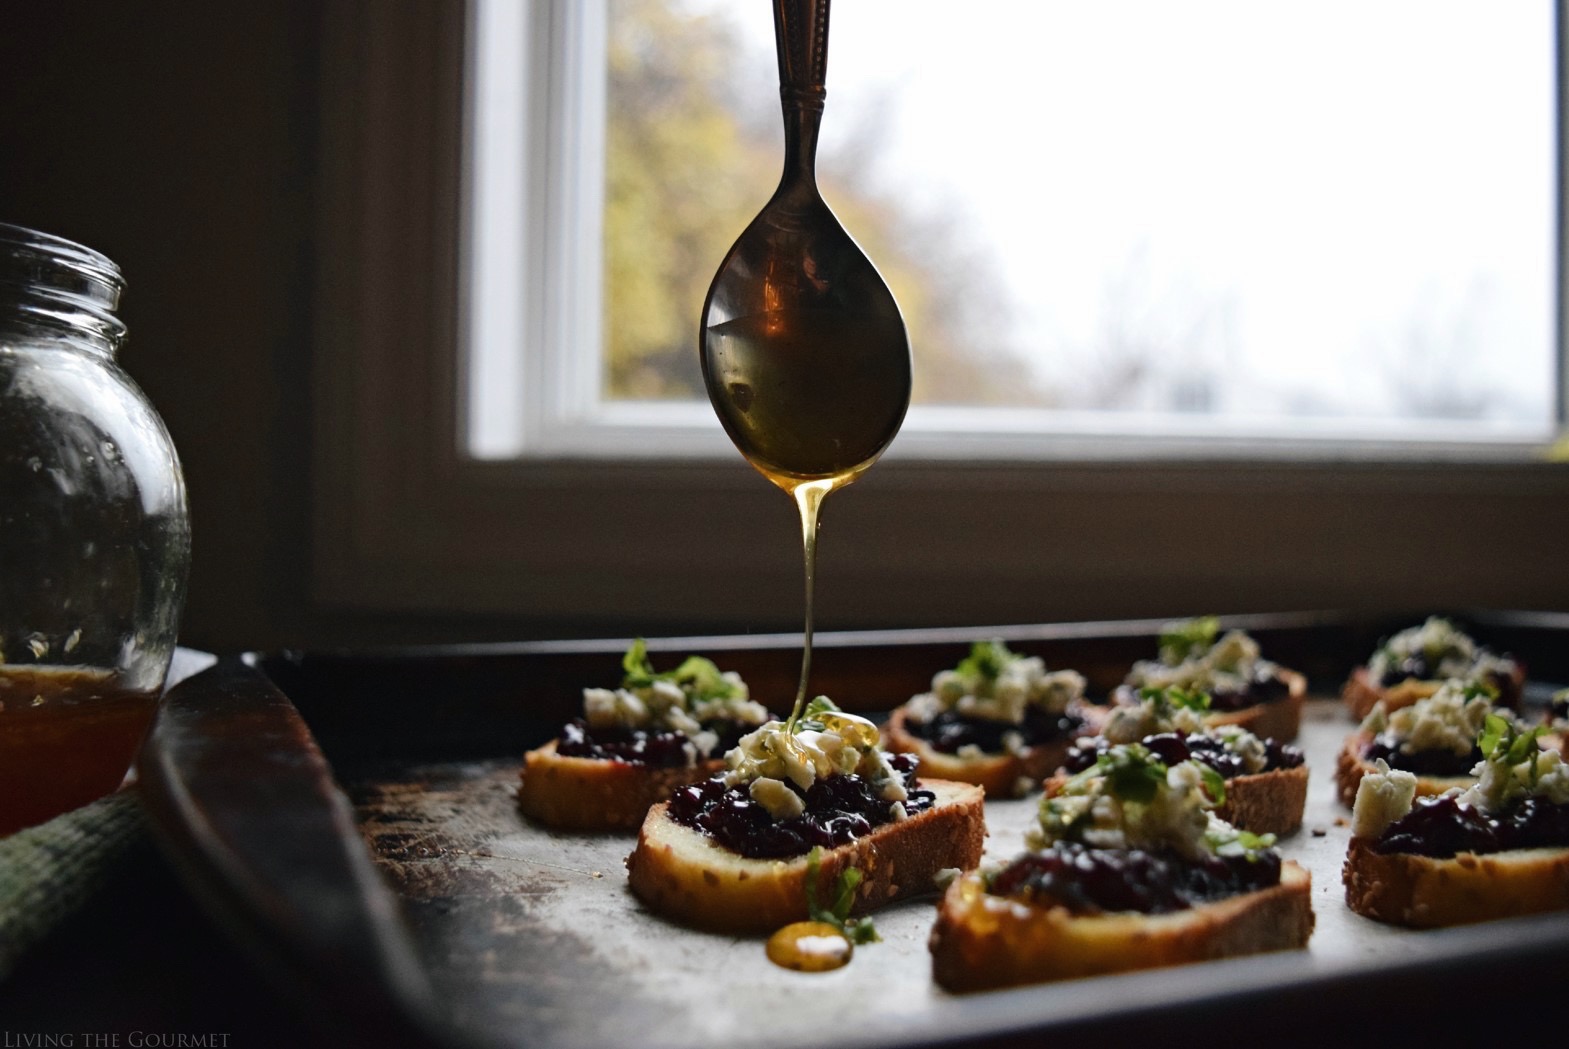 Living the Gourmet: Blackberry & Honey Crostini with Blue Cheese | Creative Cooking Crew